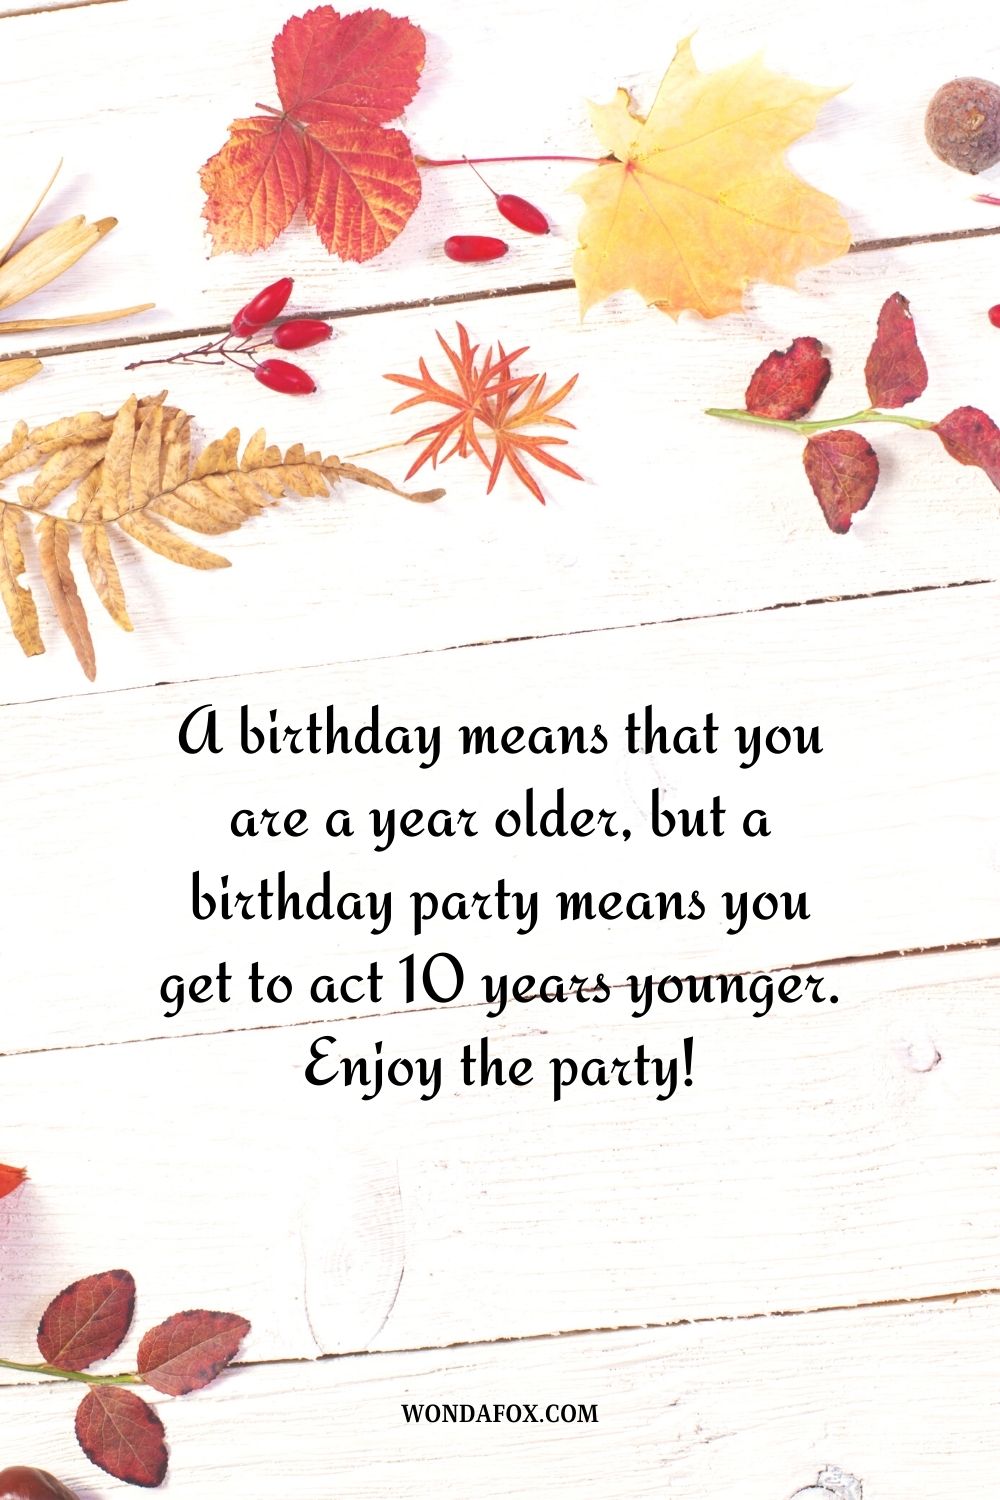 A birthday means that you are a year older, but a birthday party means you get to act 10 years younger. Enjoy the party!